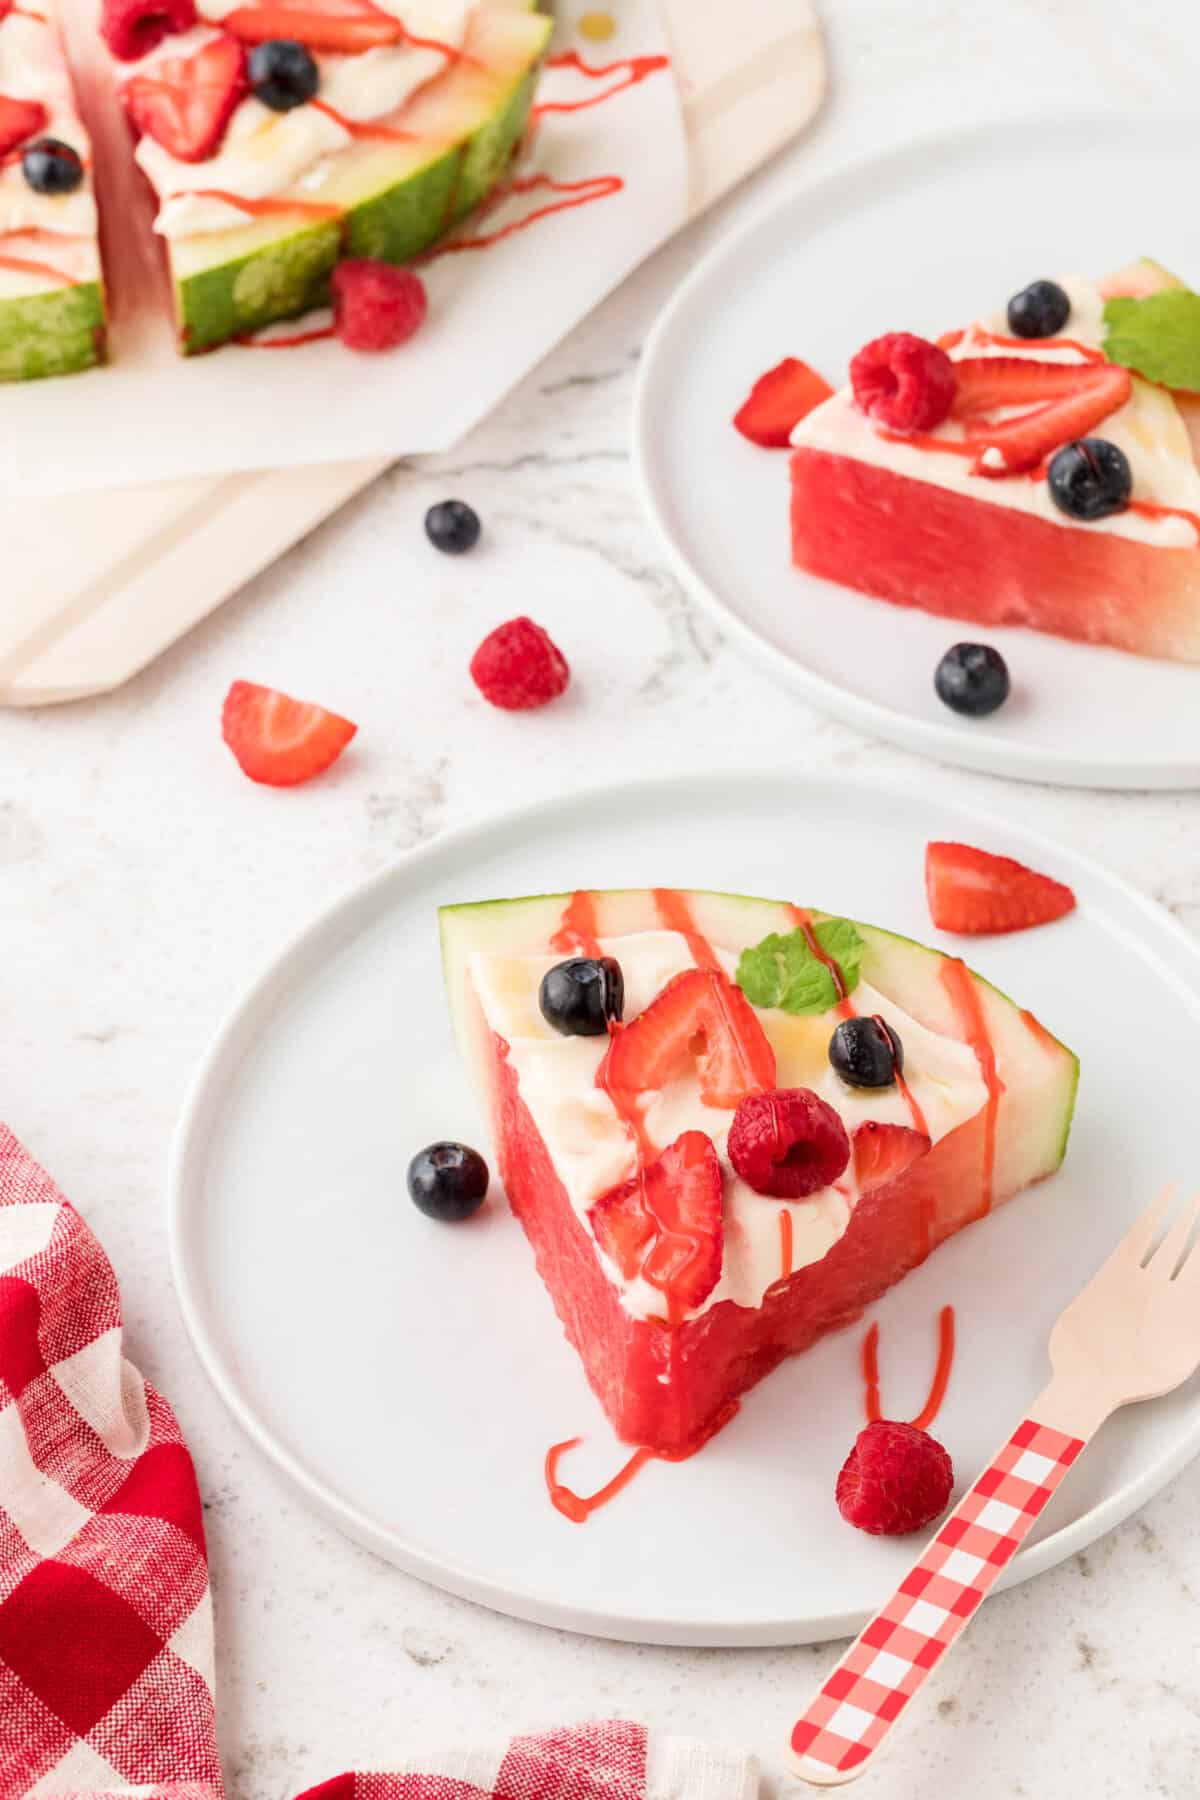 A slice of watermelon topped with whipped cream, fresh berries and a strawberry drizzle on a serving plate.